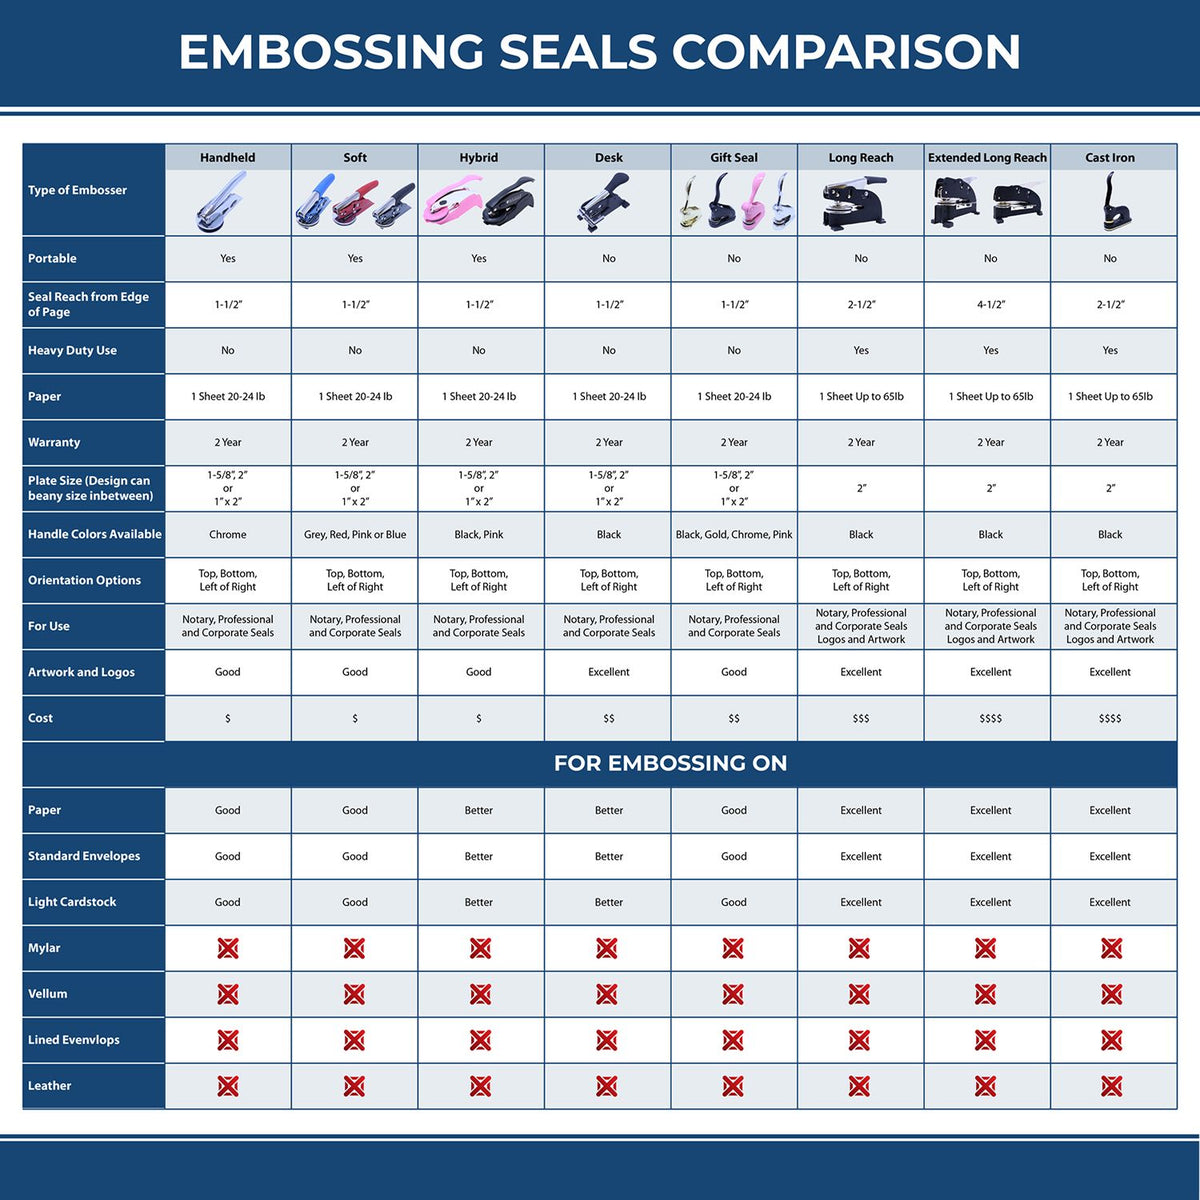 A comparison chart for the different types of mount models available for the New Jersey Desk Architect Embossing Seal.